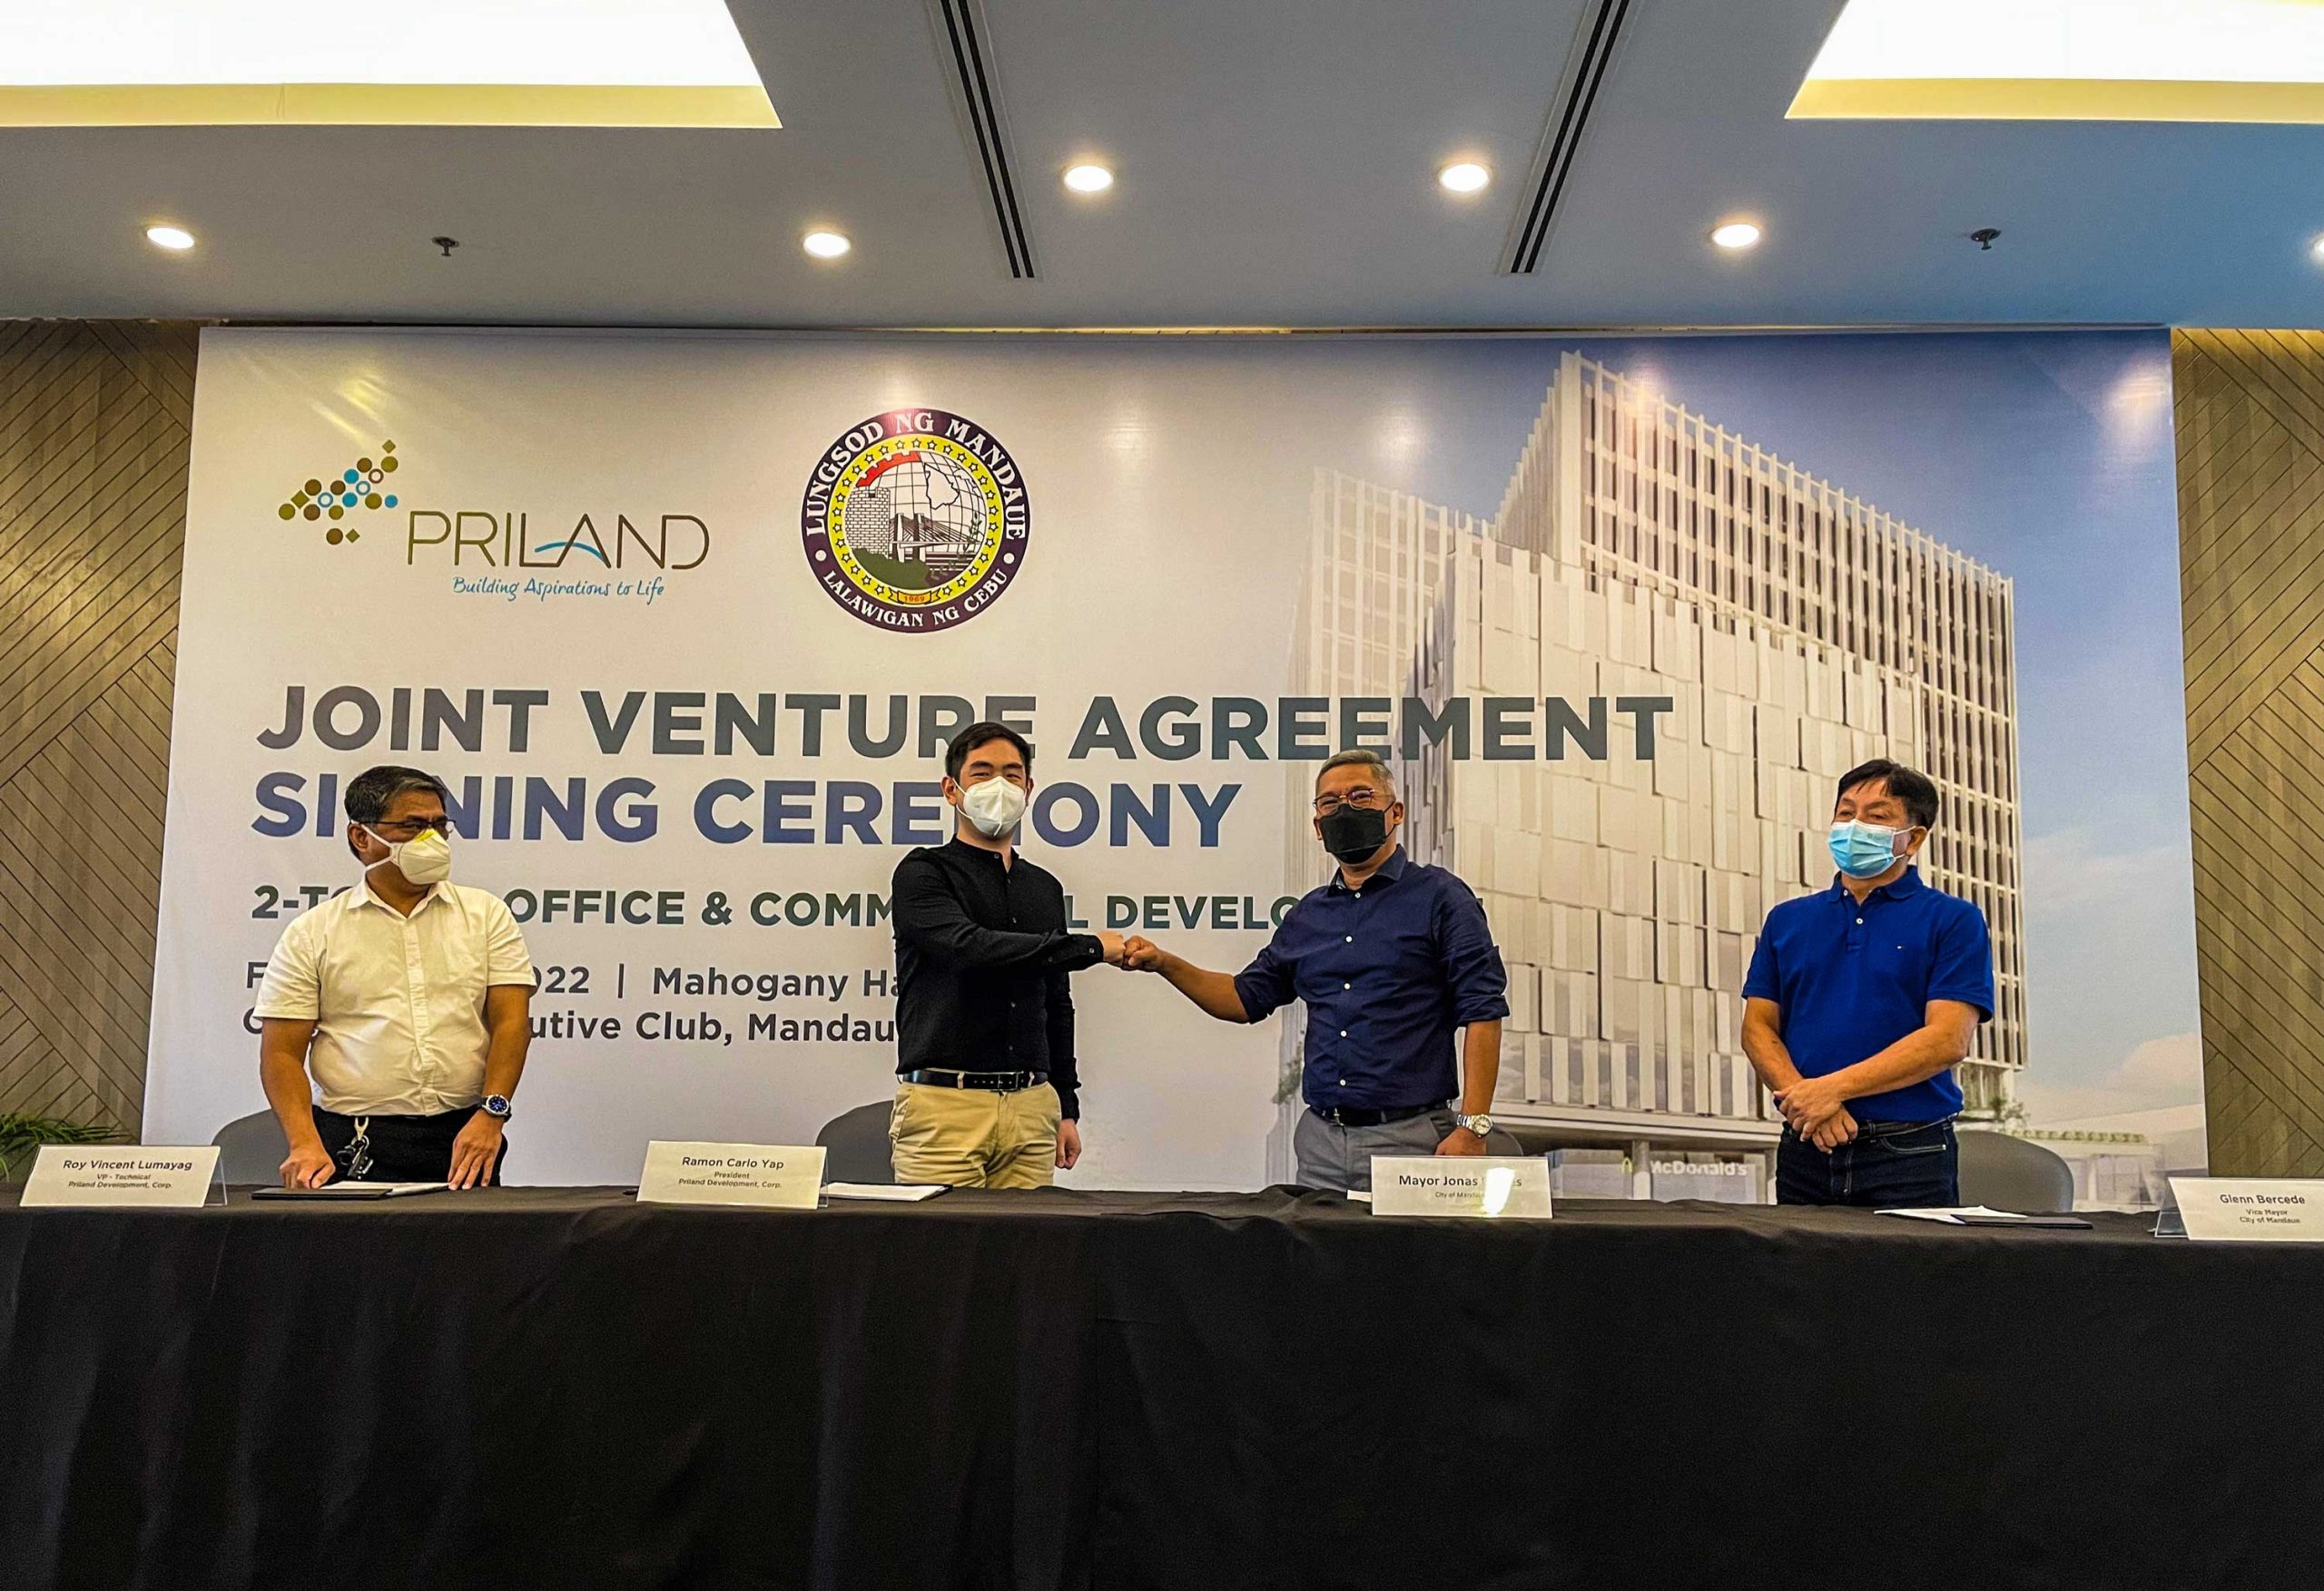 Priland inks deal with Mandaue City for P2B office, commercial development